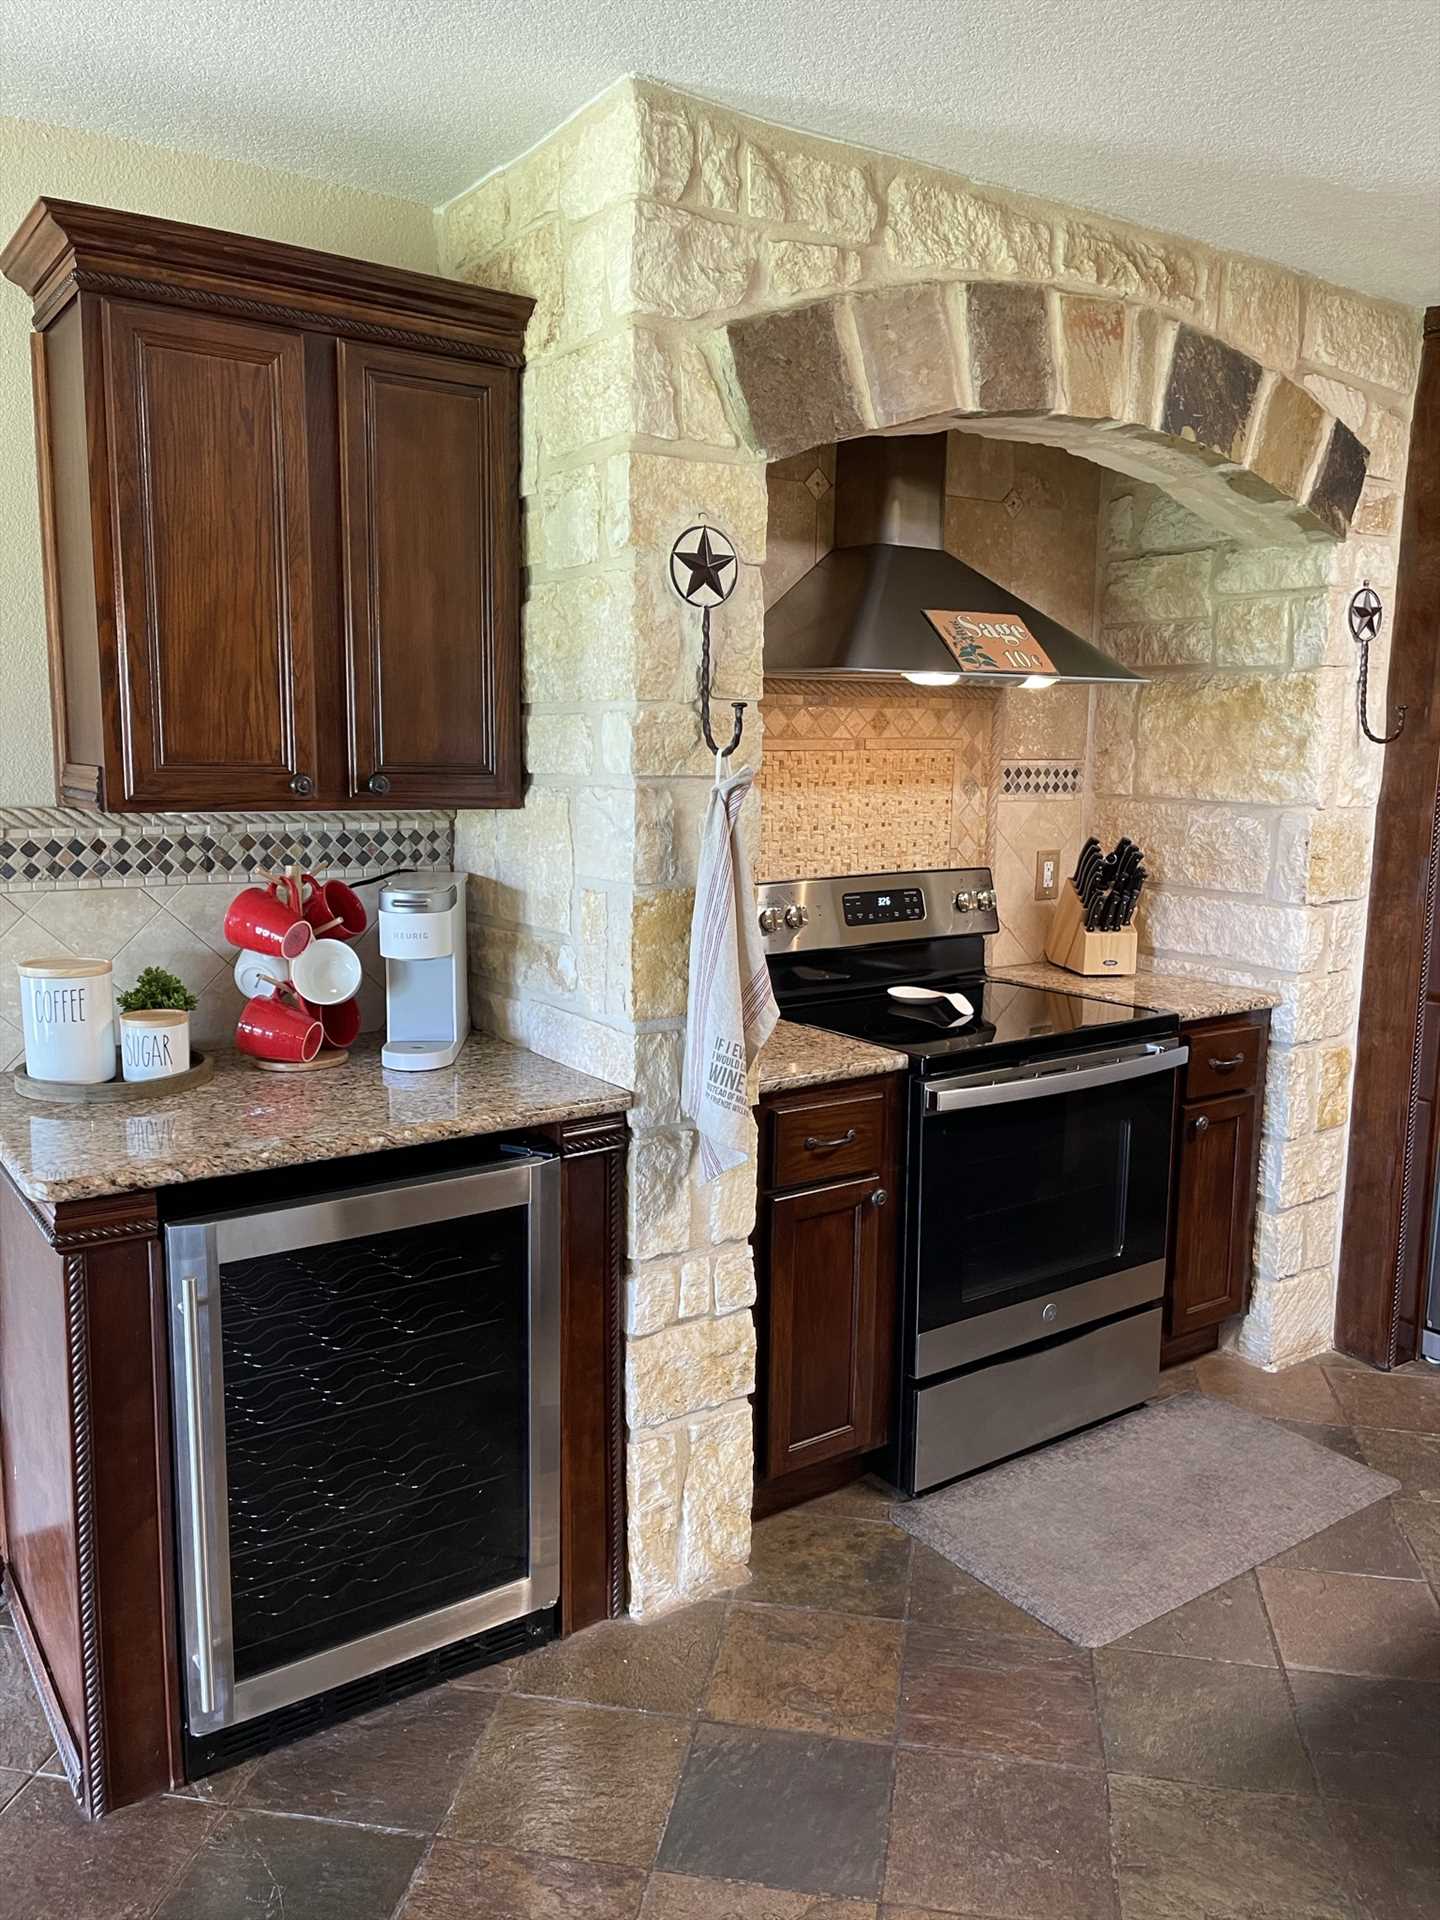                                                 The well-appointed kitchen features not only modern appliances, but pretty and functional wood and stone highlights.